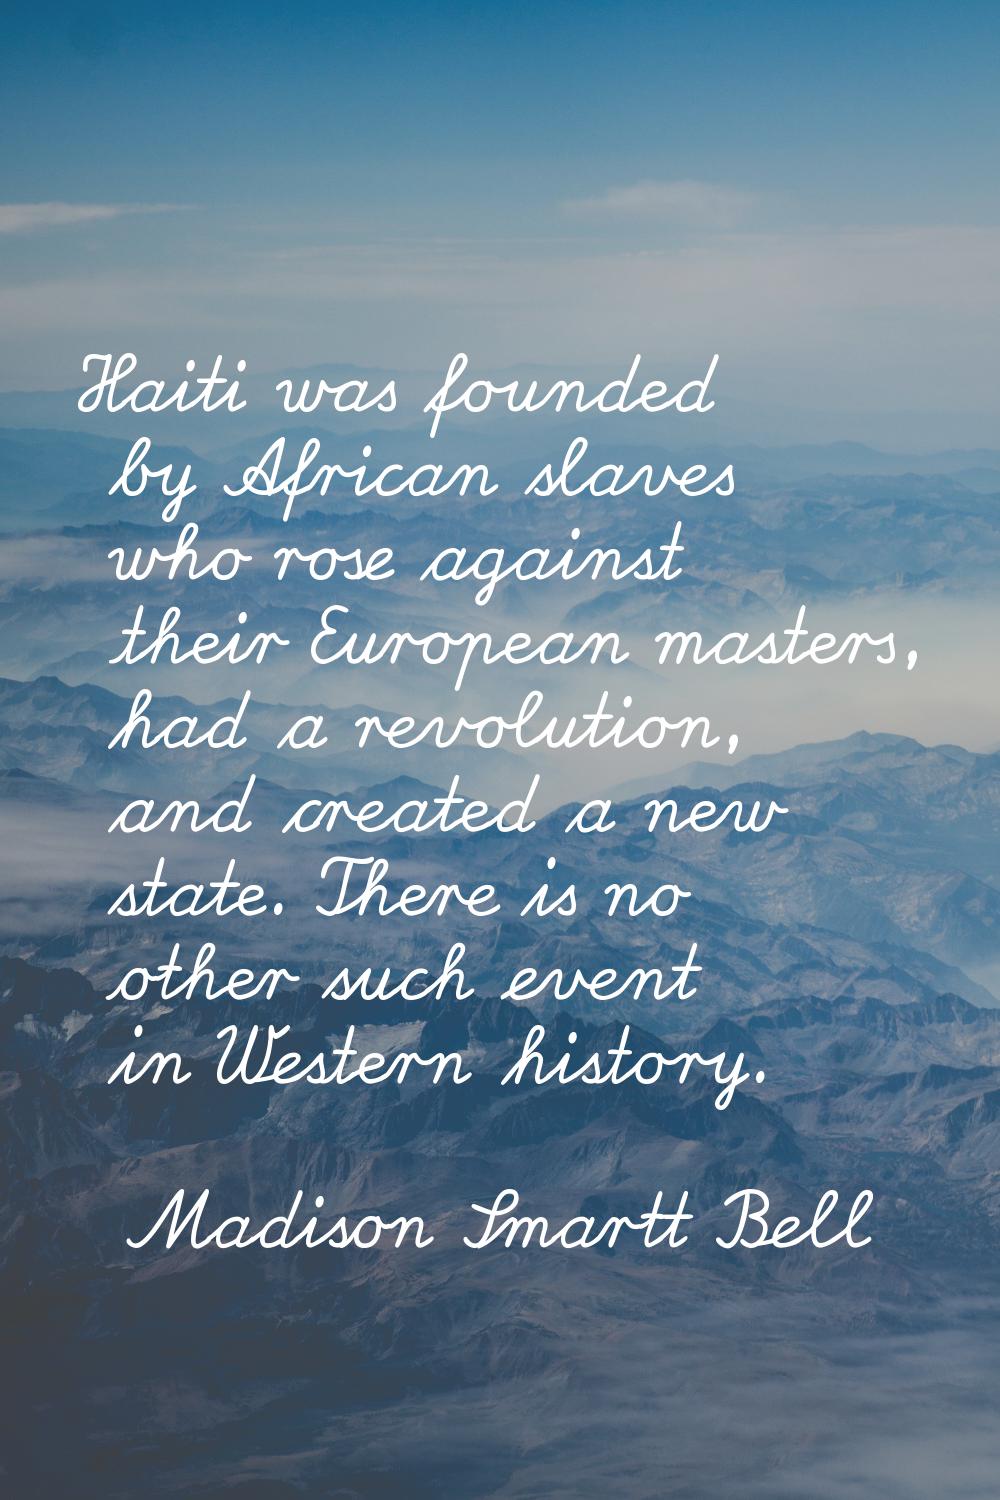 Haiti was founded by African slaves who rose against their European masters, had a revolution, and 